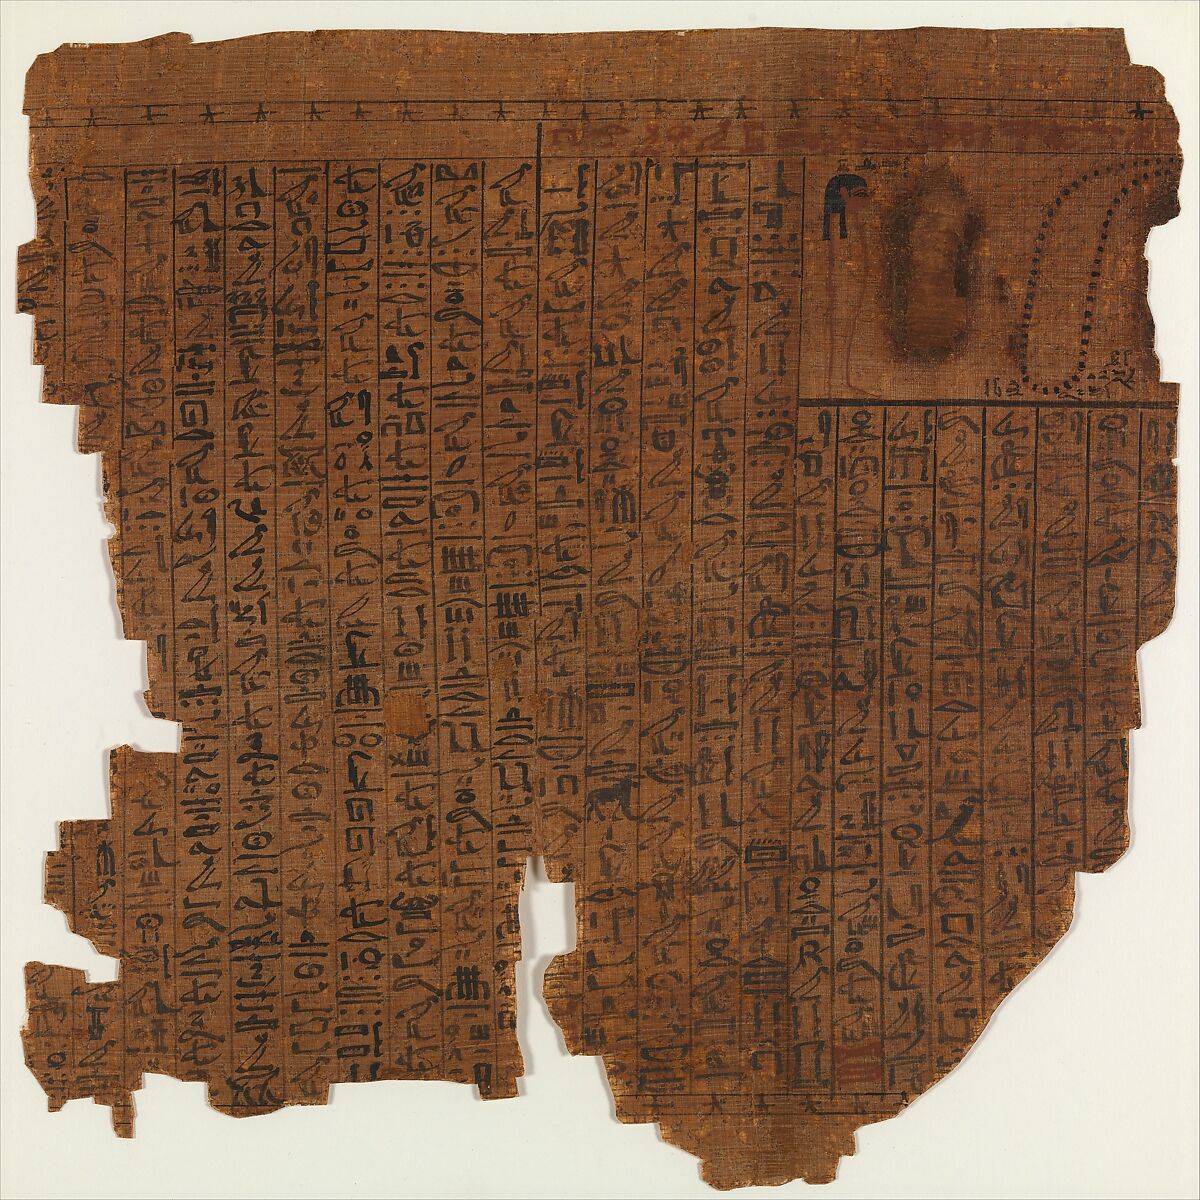 Sheet from the Papyrus of Amenhotep, Papyrus, ink, pigment